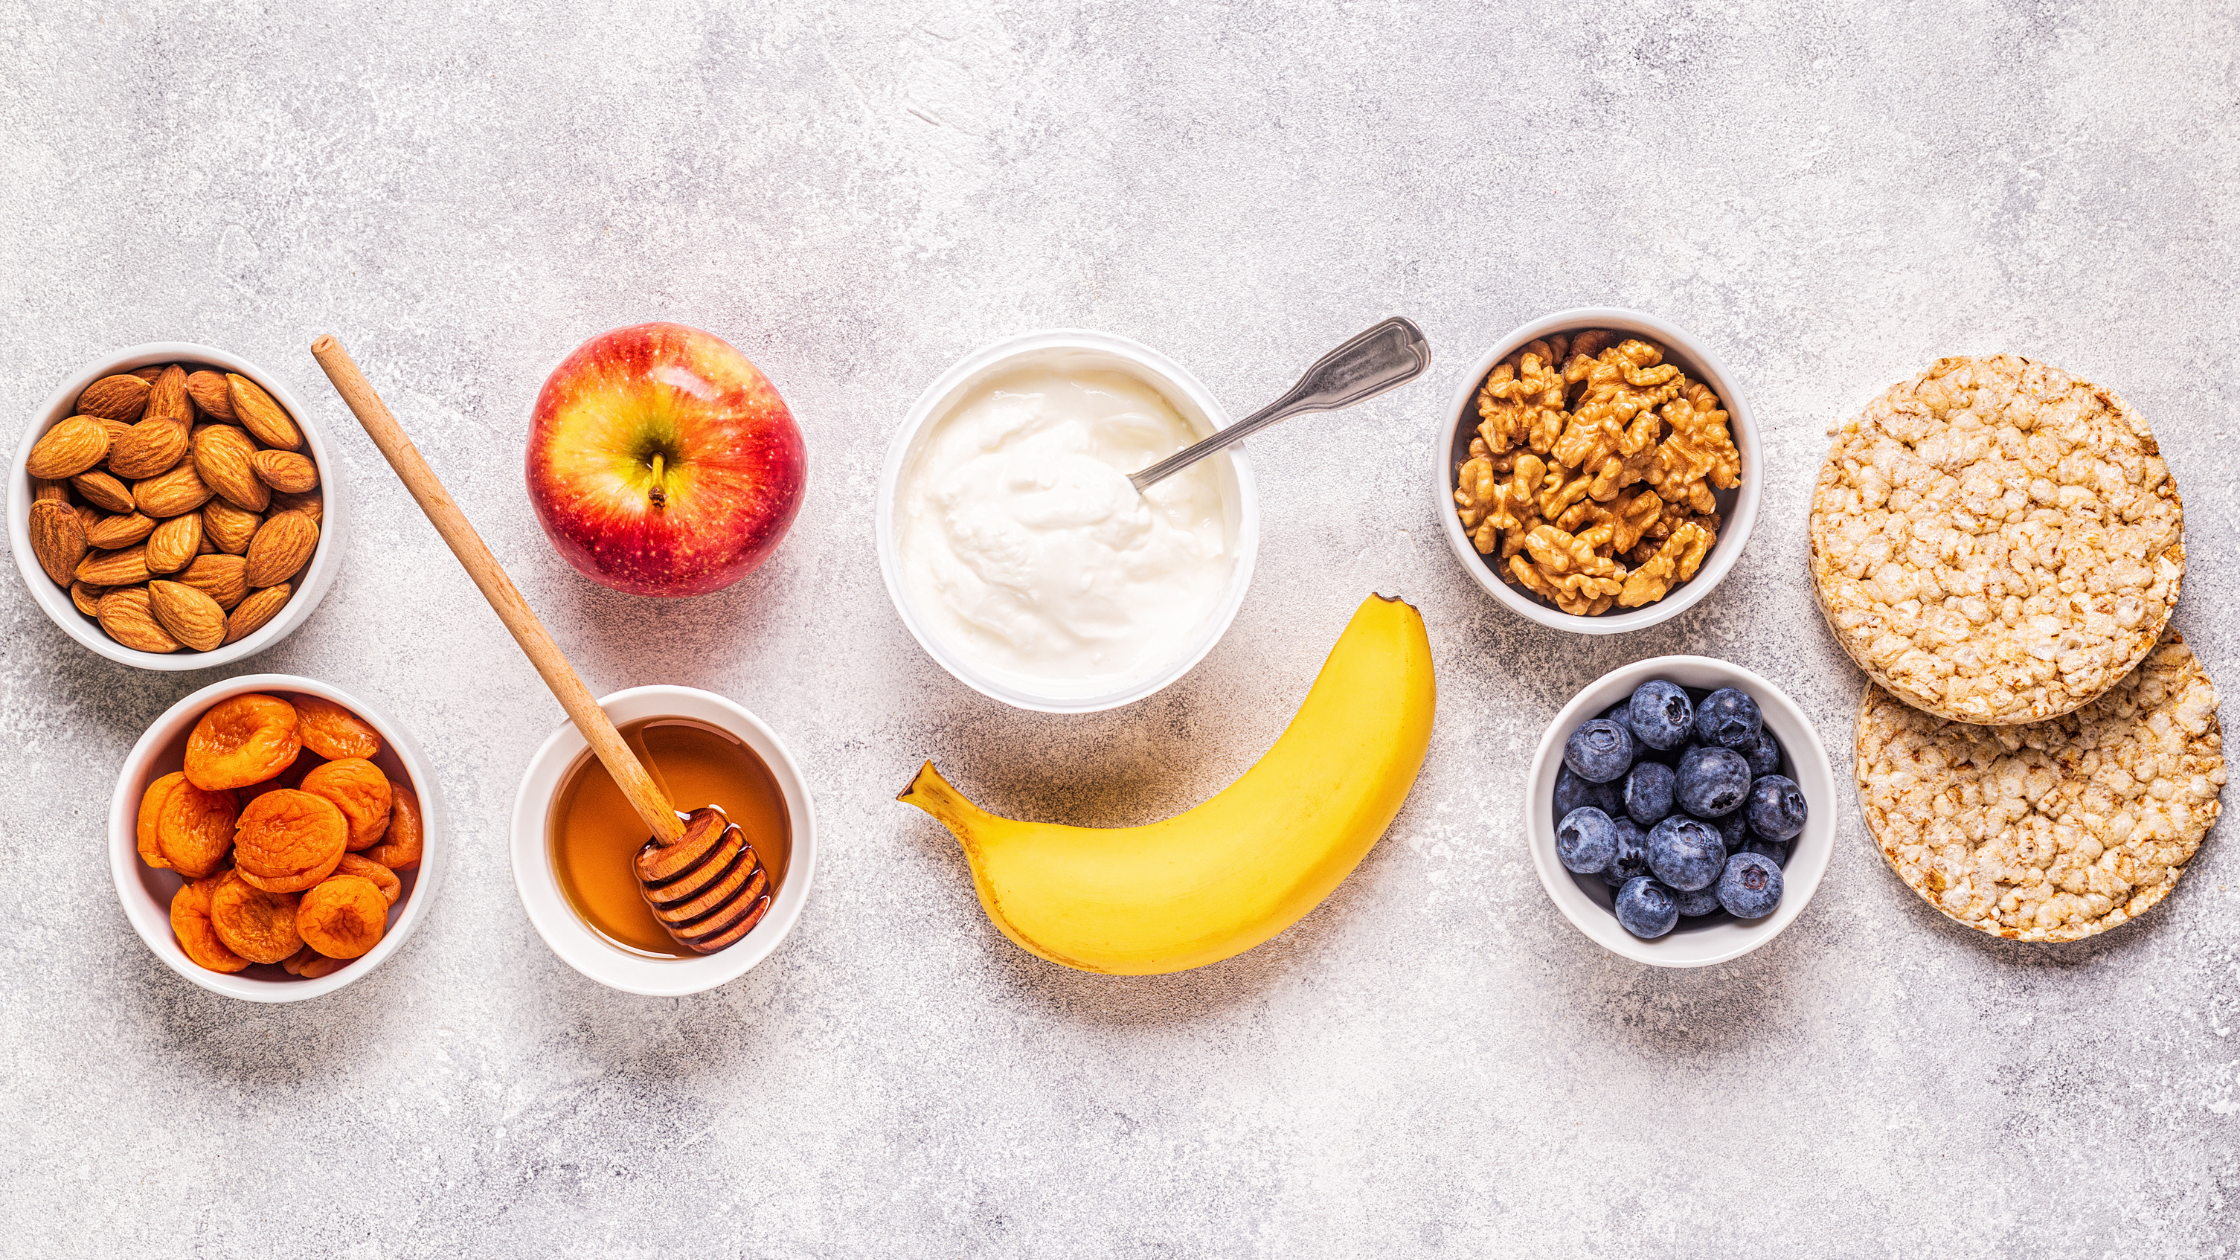 fruits, nuts, and yogurt in small portions